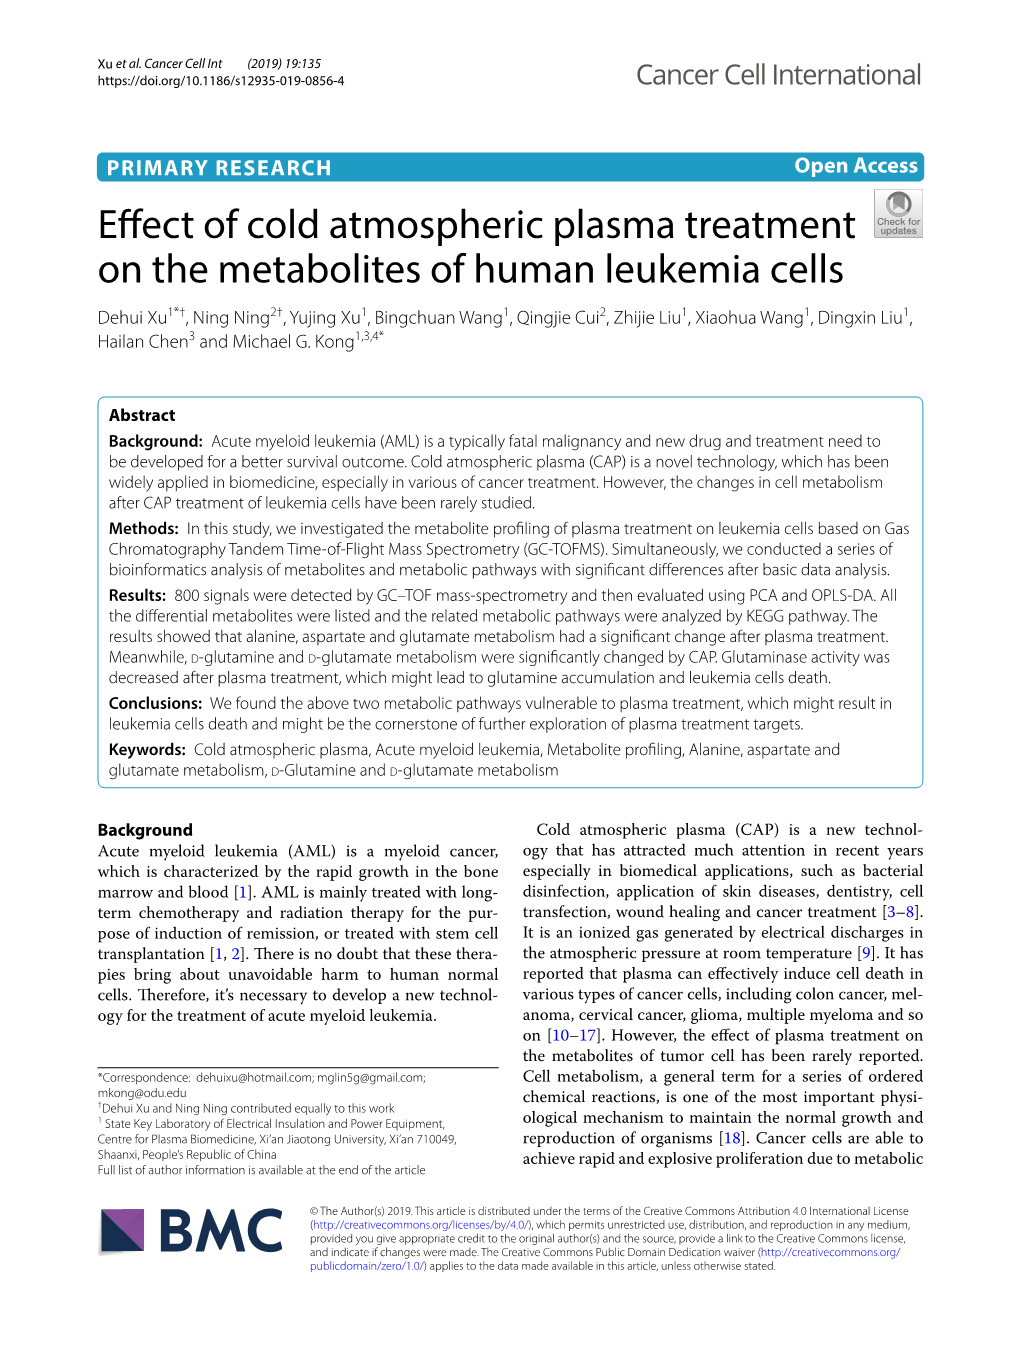 Effect of Cold Atmospheric Plasma Treatment on the Metabolites Of